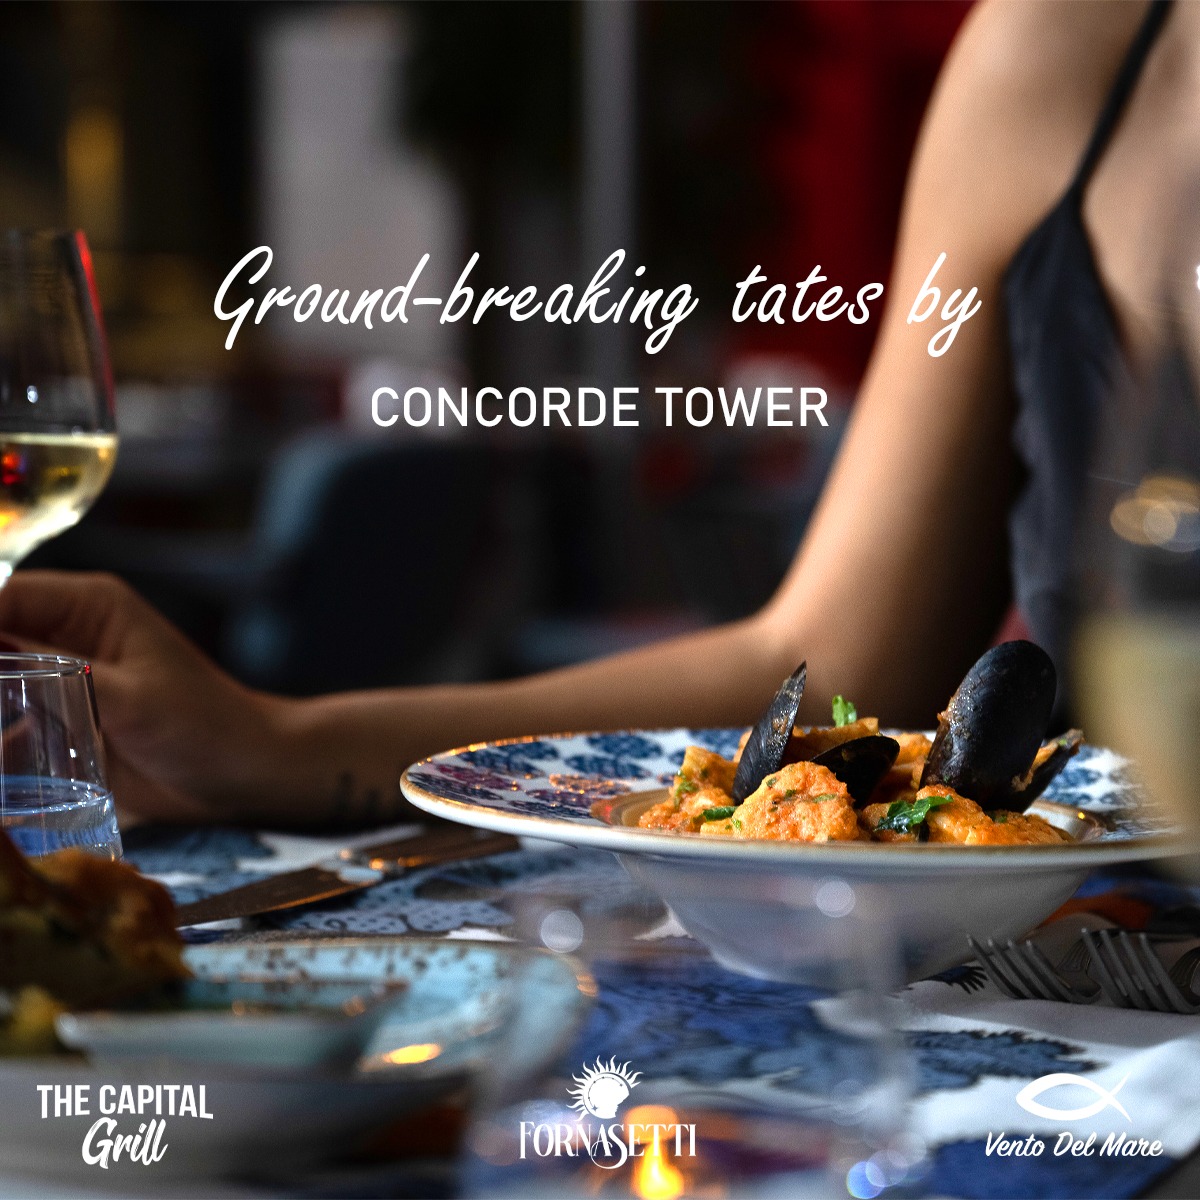 Explore Concorde Tower's A'La Carte restaurants with exquisite gourmet flavors and exceptional presentations.

 bit.ly/towerhotel
‌
.
#ConcordeHotels #ConcordeTower #ACyprusStory #DiscoverCyprus #VisitNcy